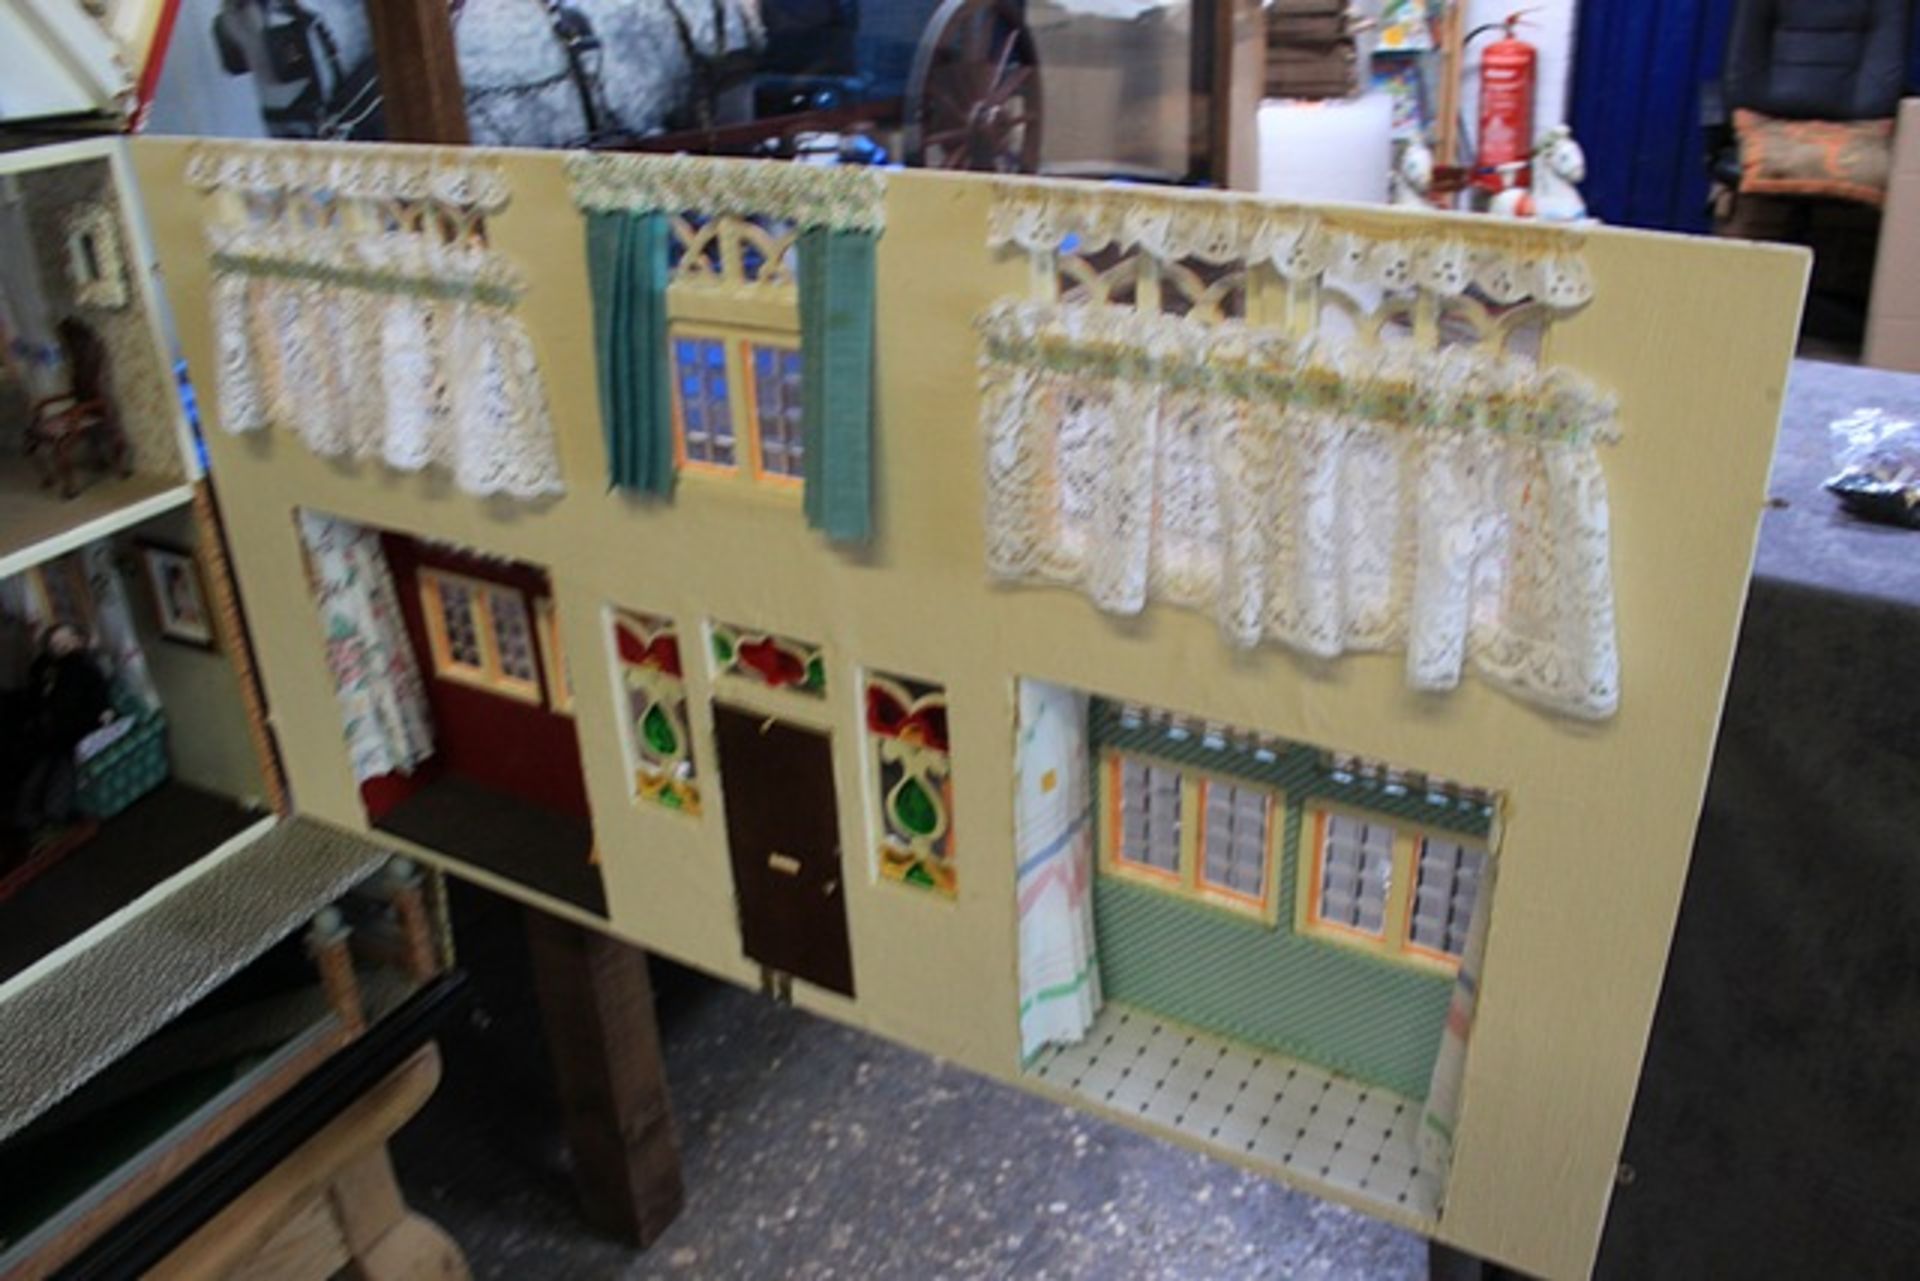 Stunning Dolls House With Pull Out Garden Area This Comes With Lots Of Furniture Including Bed, - Image 5 of 9